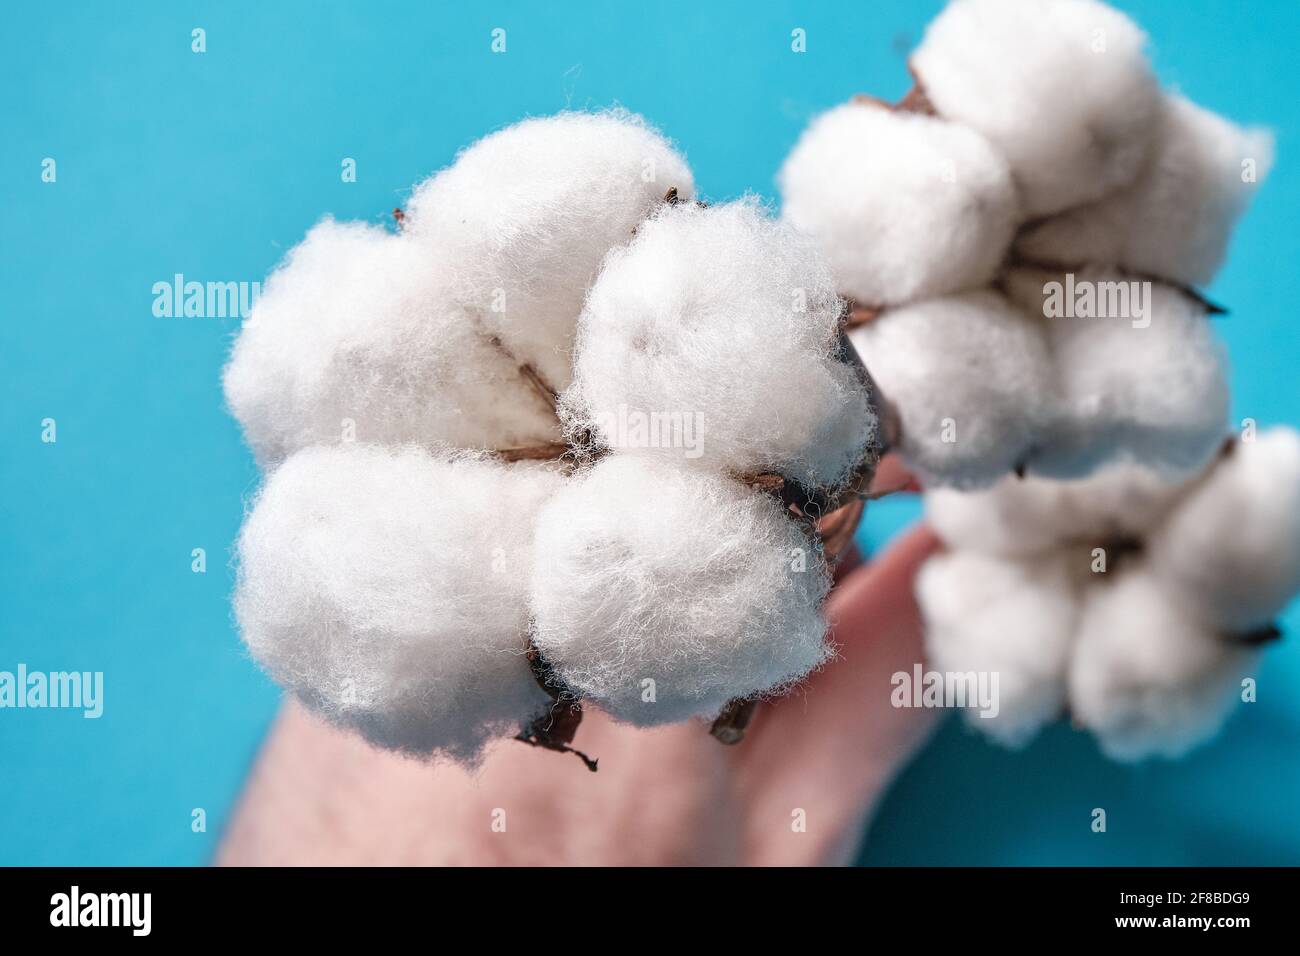 Branch with cotton on a blue background Stock Photo